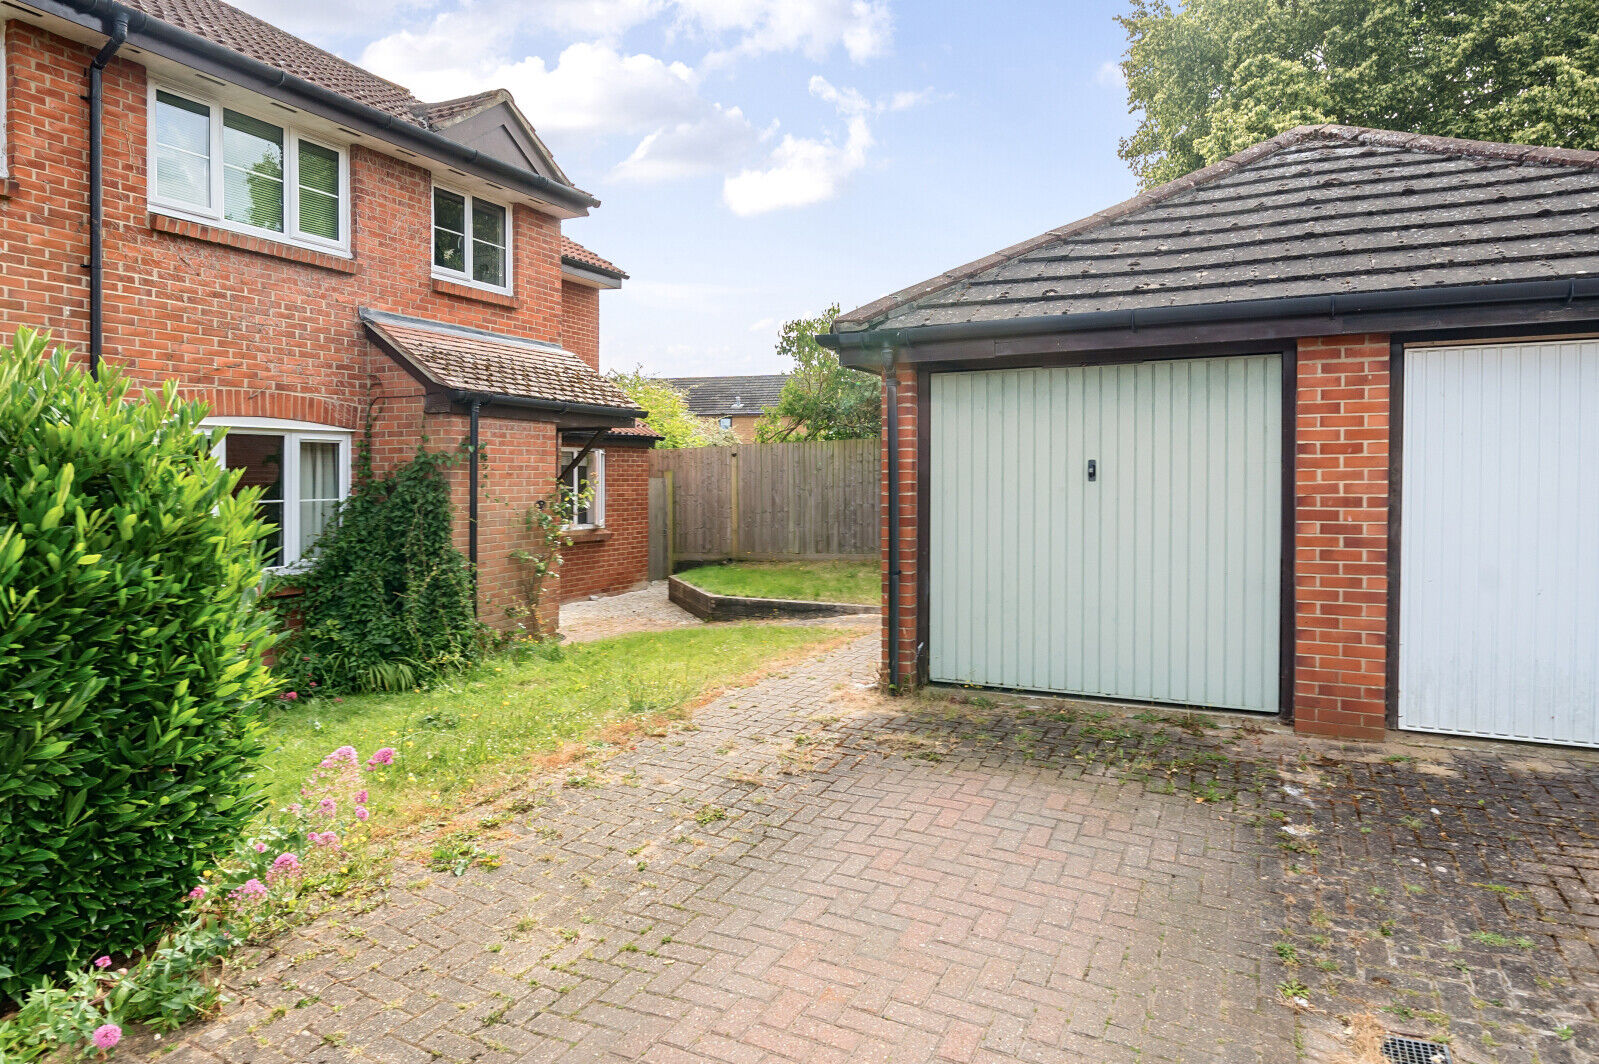 4 bedroom semi detached house for sale Gooch Close, Twyford, RG10, main image